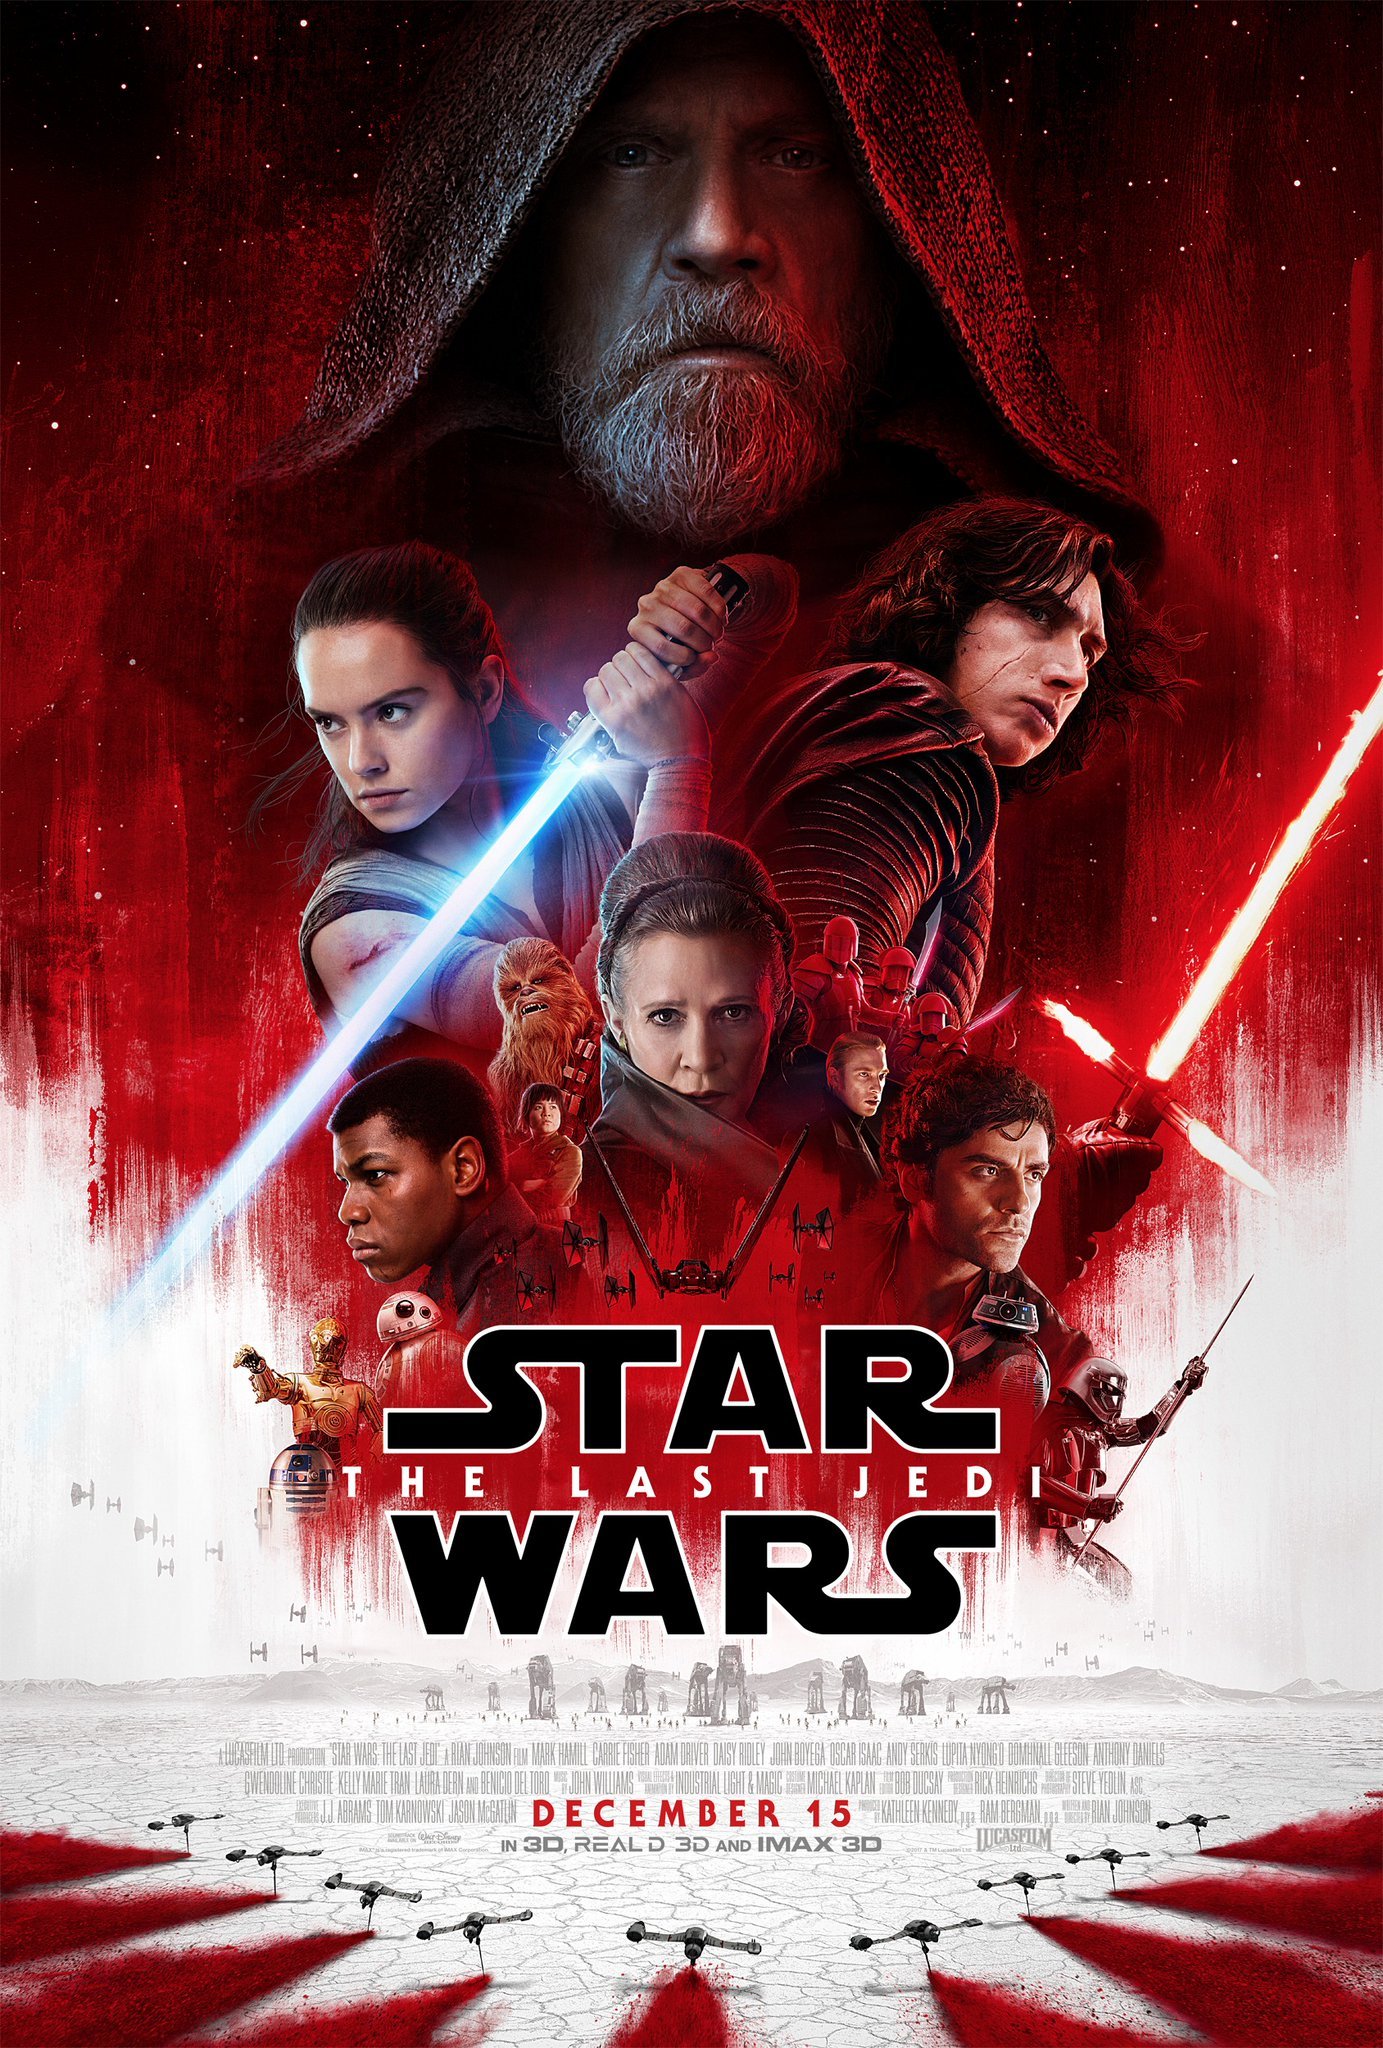 New promo posters and character portraits for Star Wars: The Last Jedi